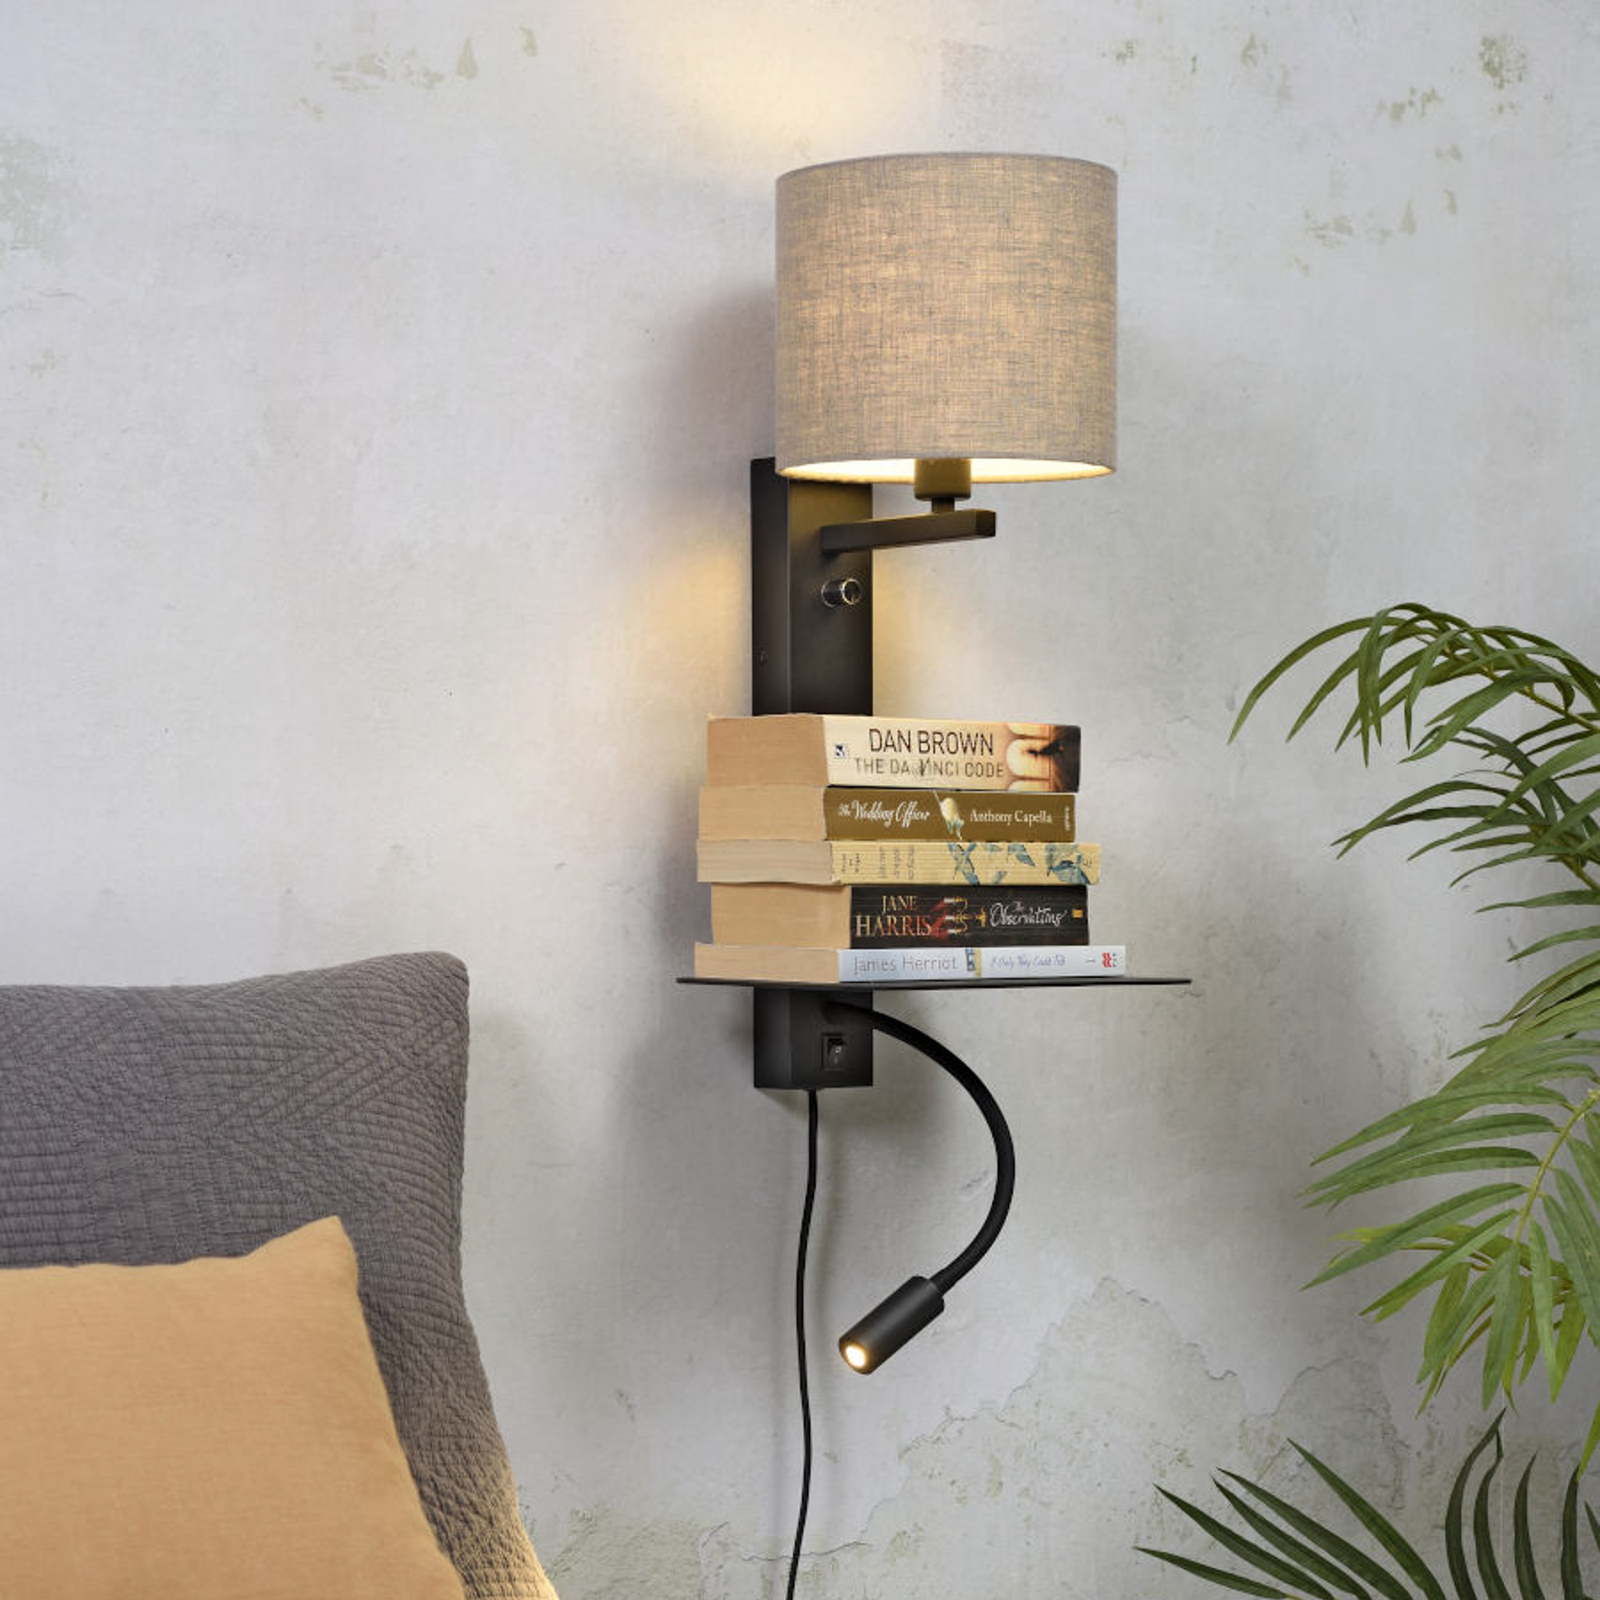 It’s about RoMi Florence reading lamp 2-bulb linen